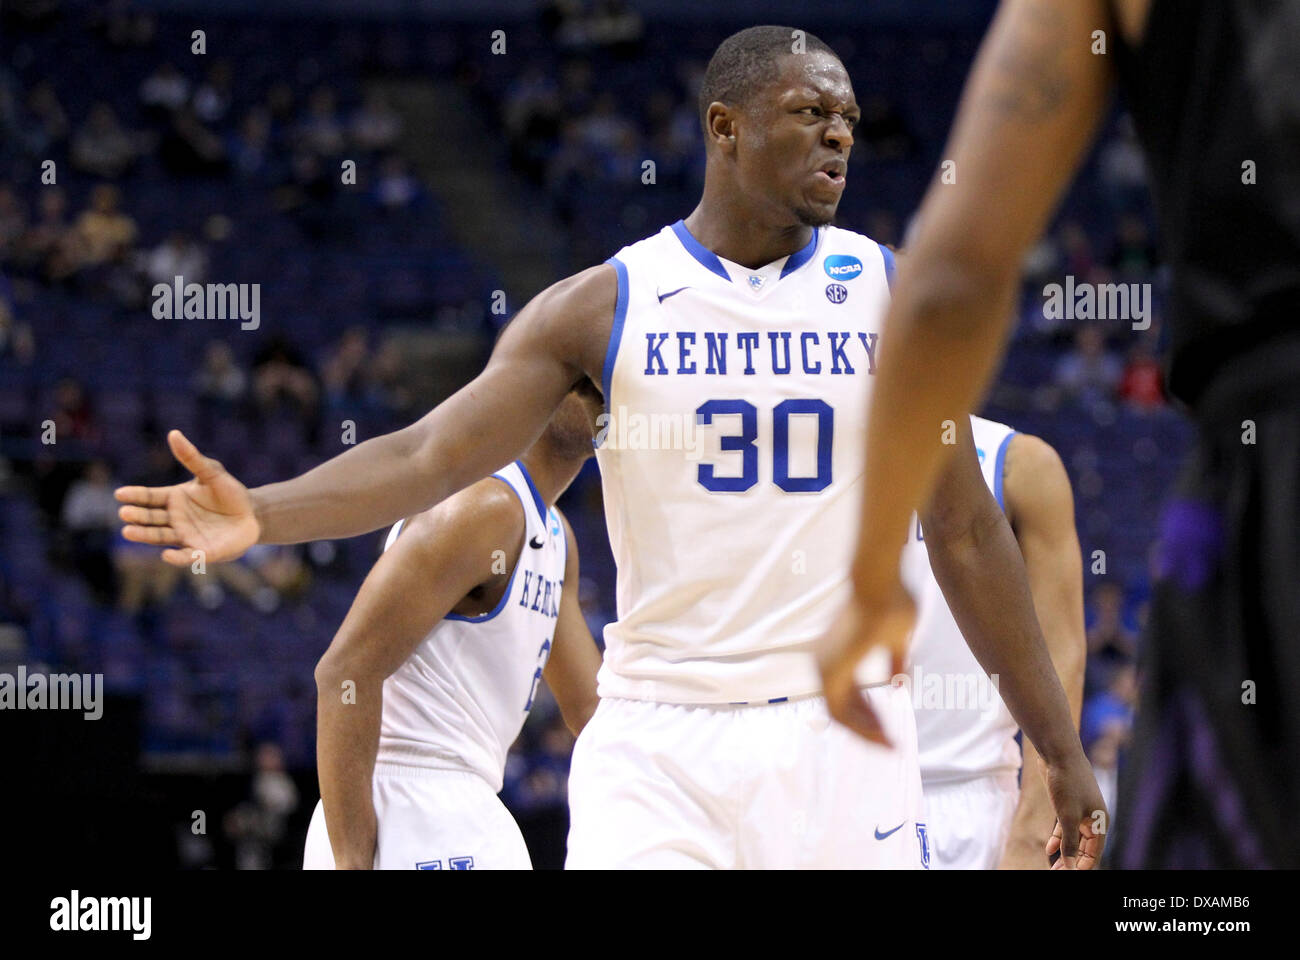 St.Louis, MO, USA. 21st Mar, 2014. Kentucky Wildcats forward Julius Randle (30) reacted to the bench after missing a free-throw as Kentucky defeated Kansas State 56-49 in the NCAA tournament on Friday March 21, 2014 in St. Louis, MO. Photo by Mark Cornelison | Staff © Lexington Herald-Leader/ZUMAPRESS.com/Alamy Live News Stock Photo